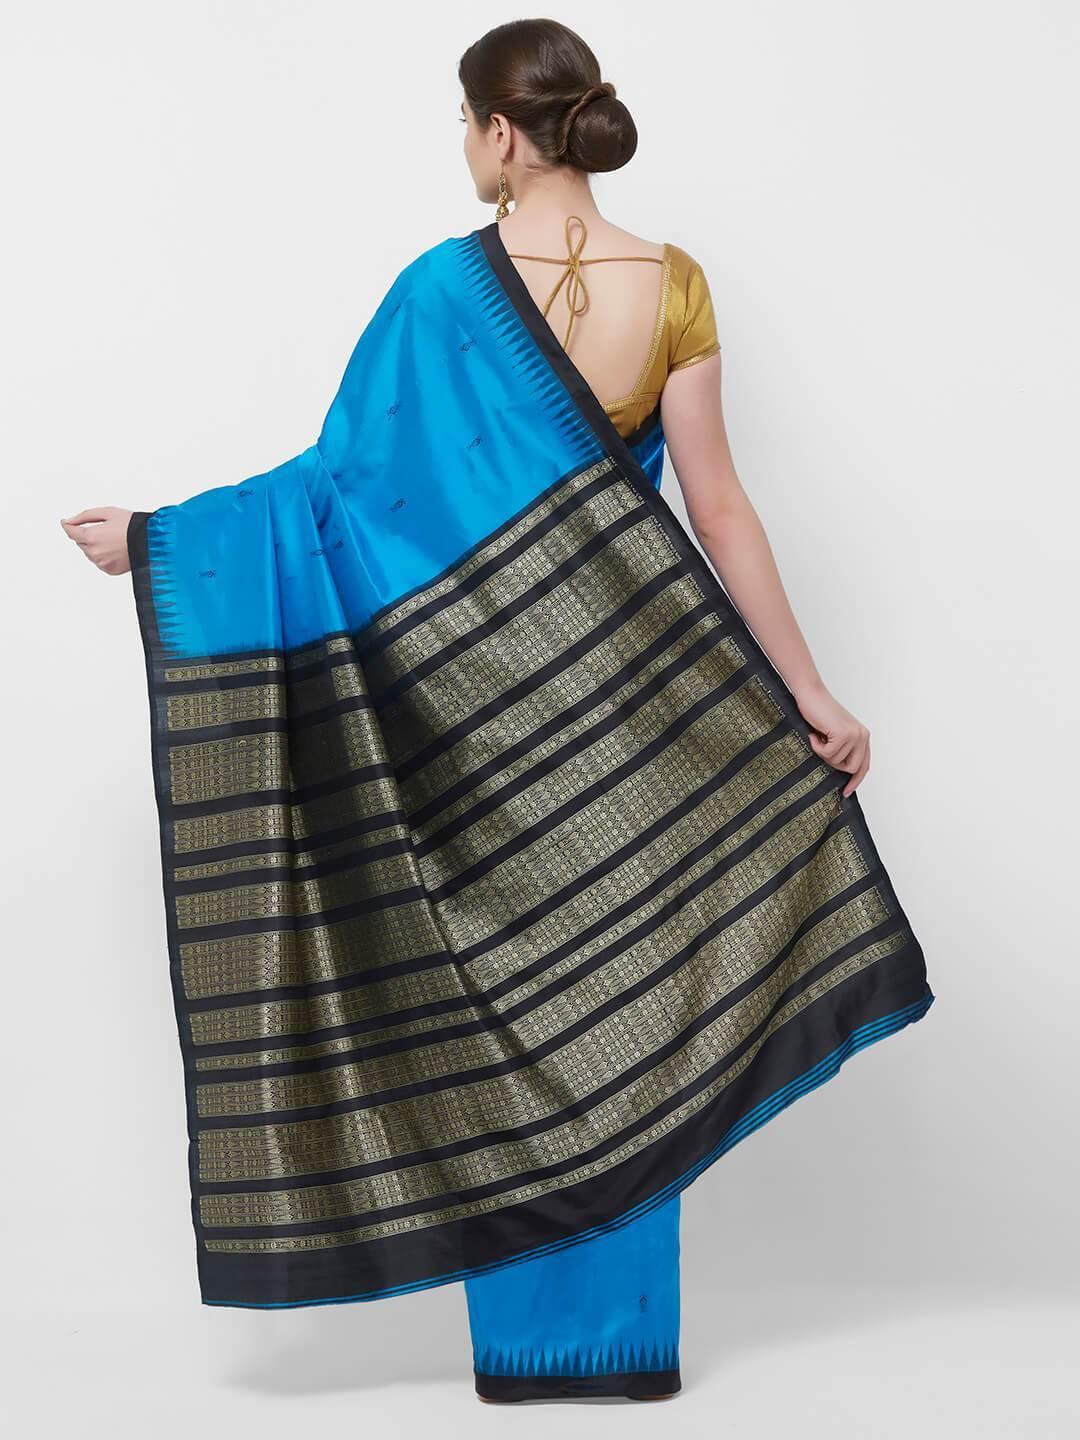 CraftsCollection.in -Blue and black Bomkai Saree with woven Fish motifs